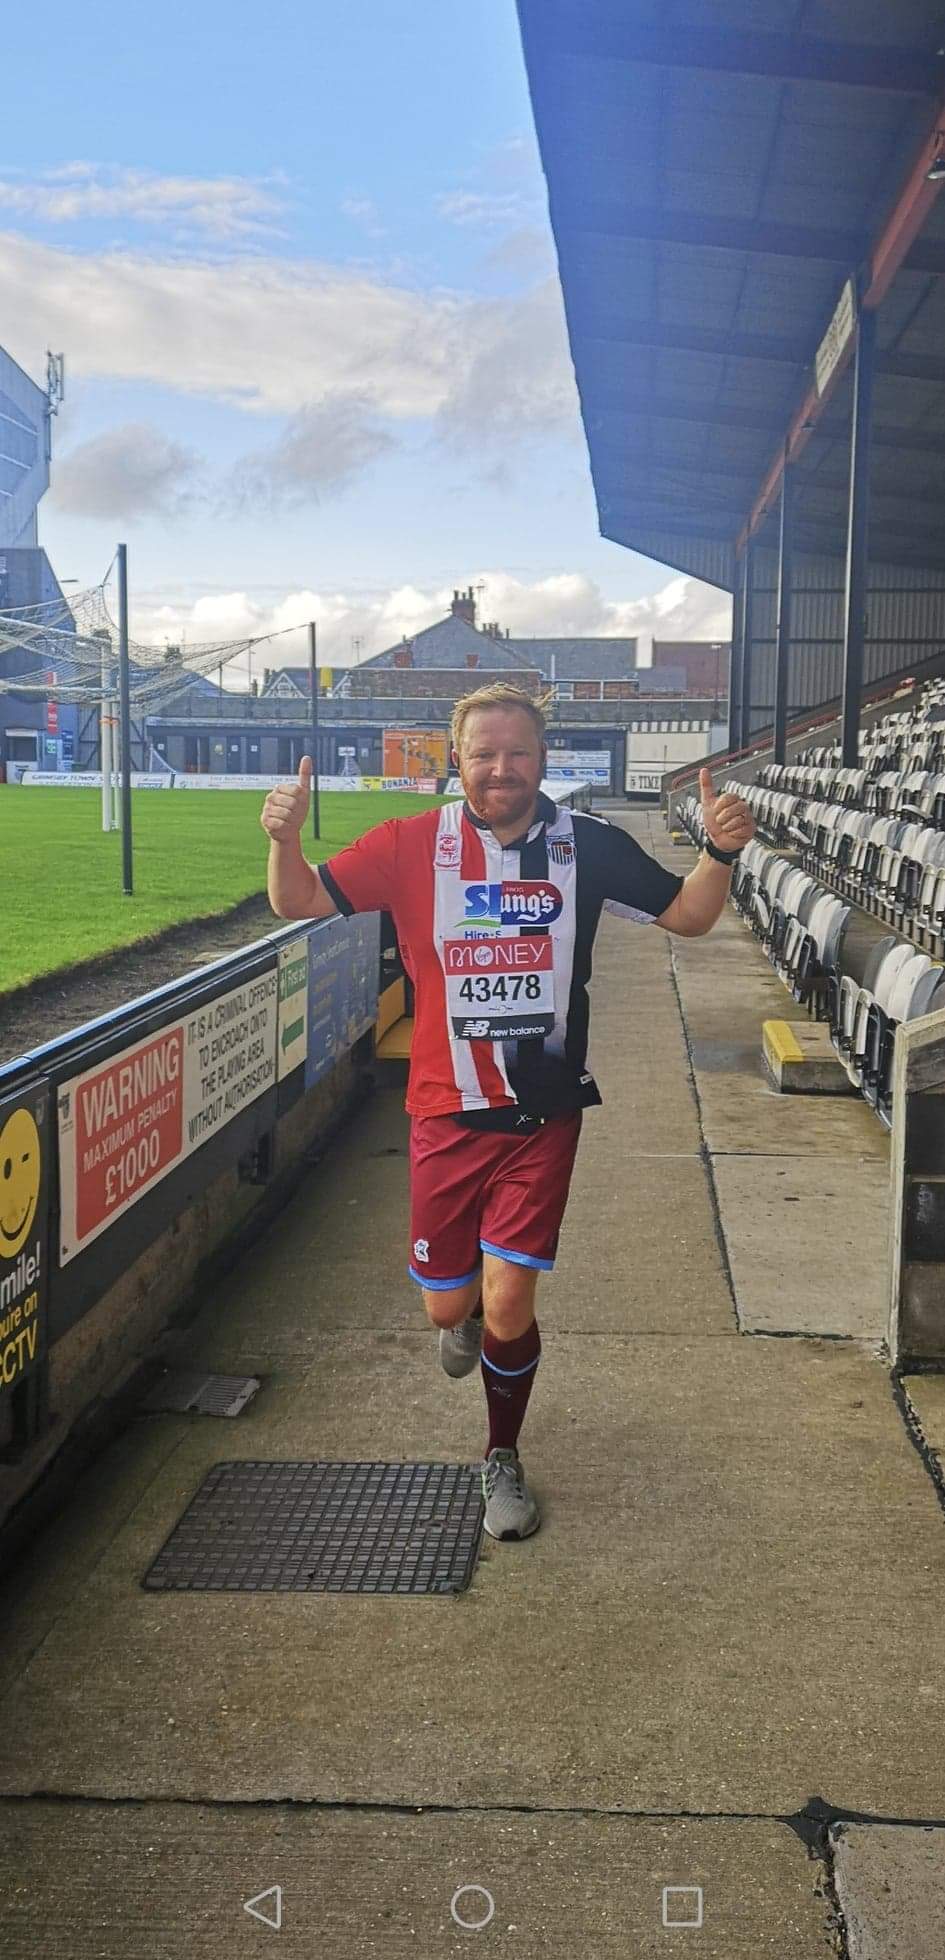 James Whaley, from Grimsby, completed his 26.2 miles by doing 130 laps of Grimsby Town FC’s Blundell Park pitch, raising money for the When You Wish Upon a Star charity. 